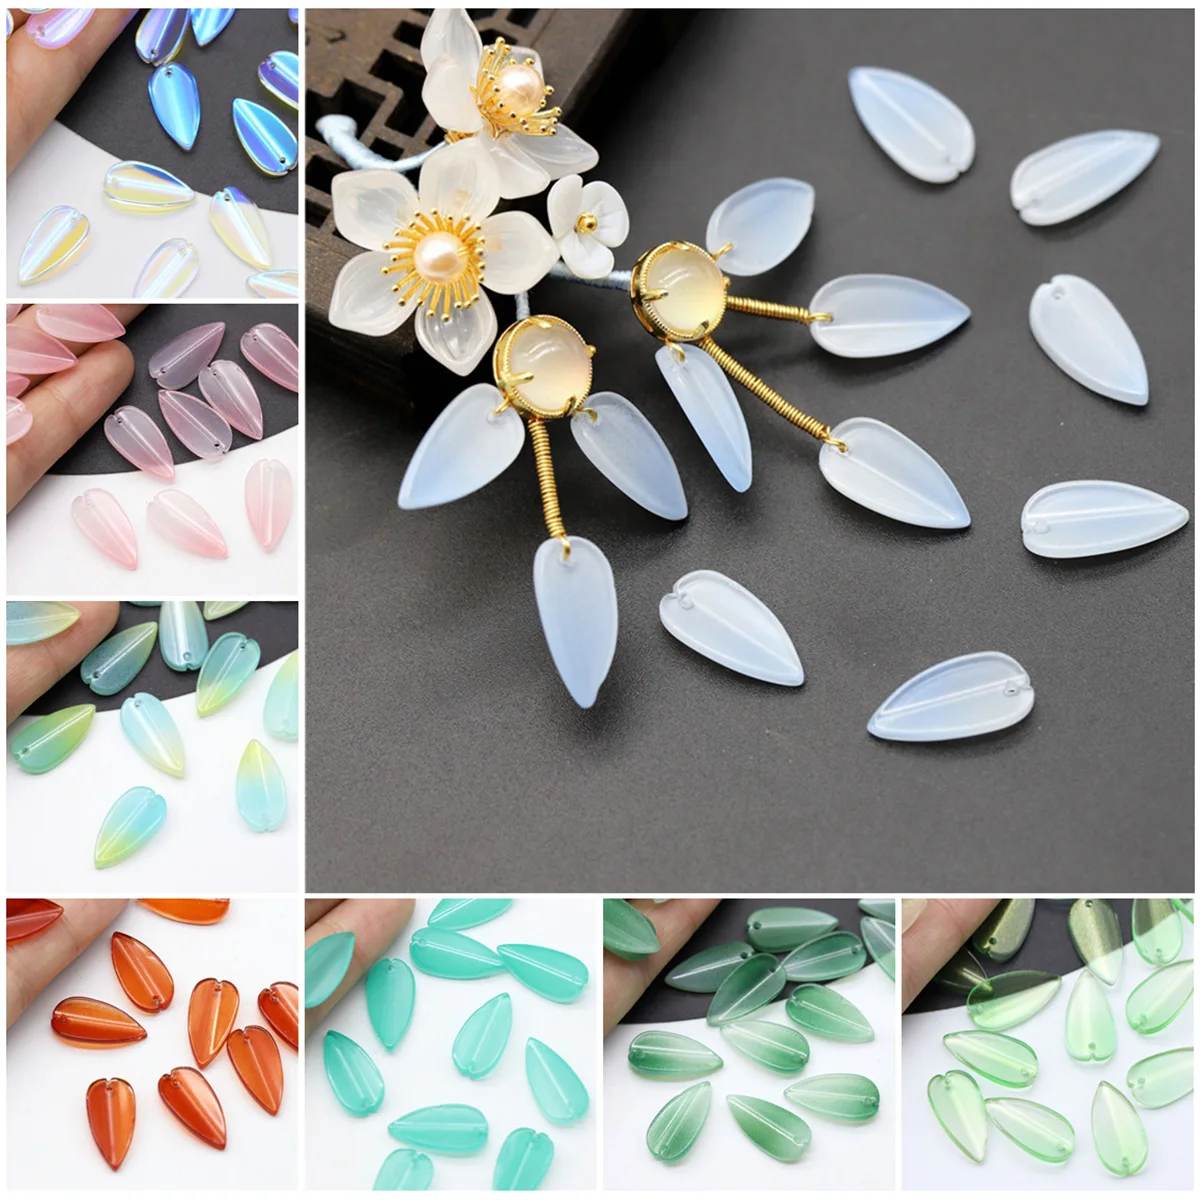 10pcs Leaf Shape Petal 19x10mm Lampwork Crystal Glass Loose Pendants Beads for Jewelry Making DIY Crafts Findings